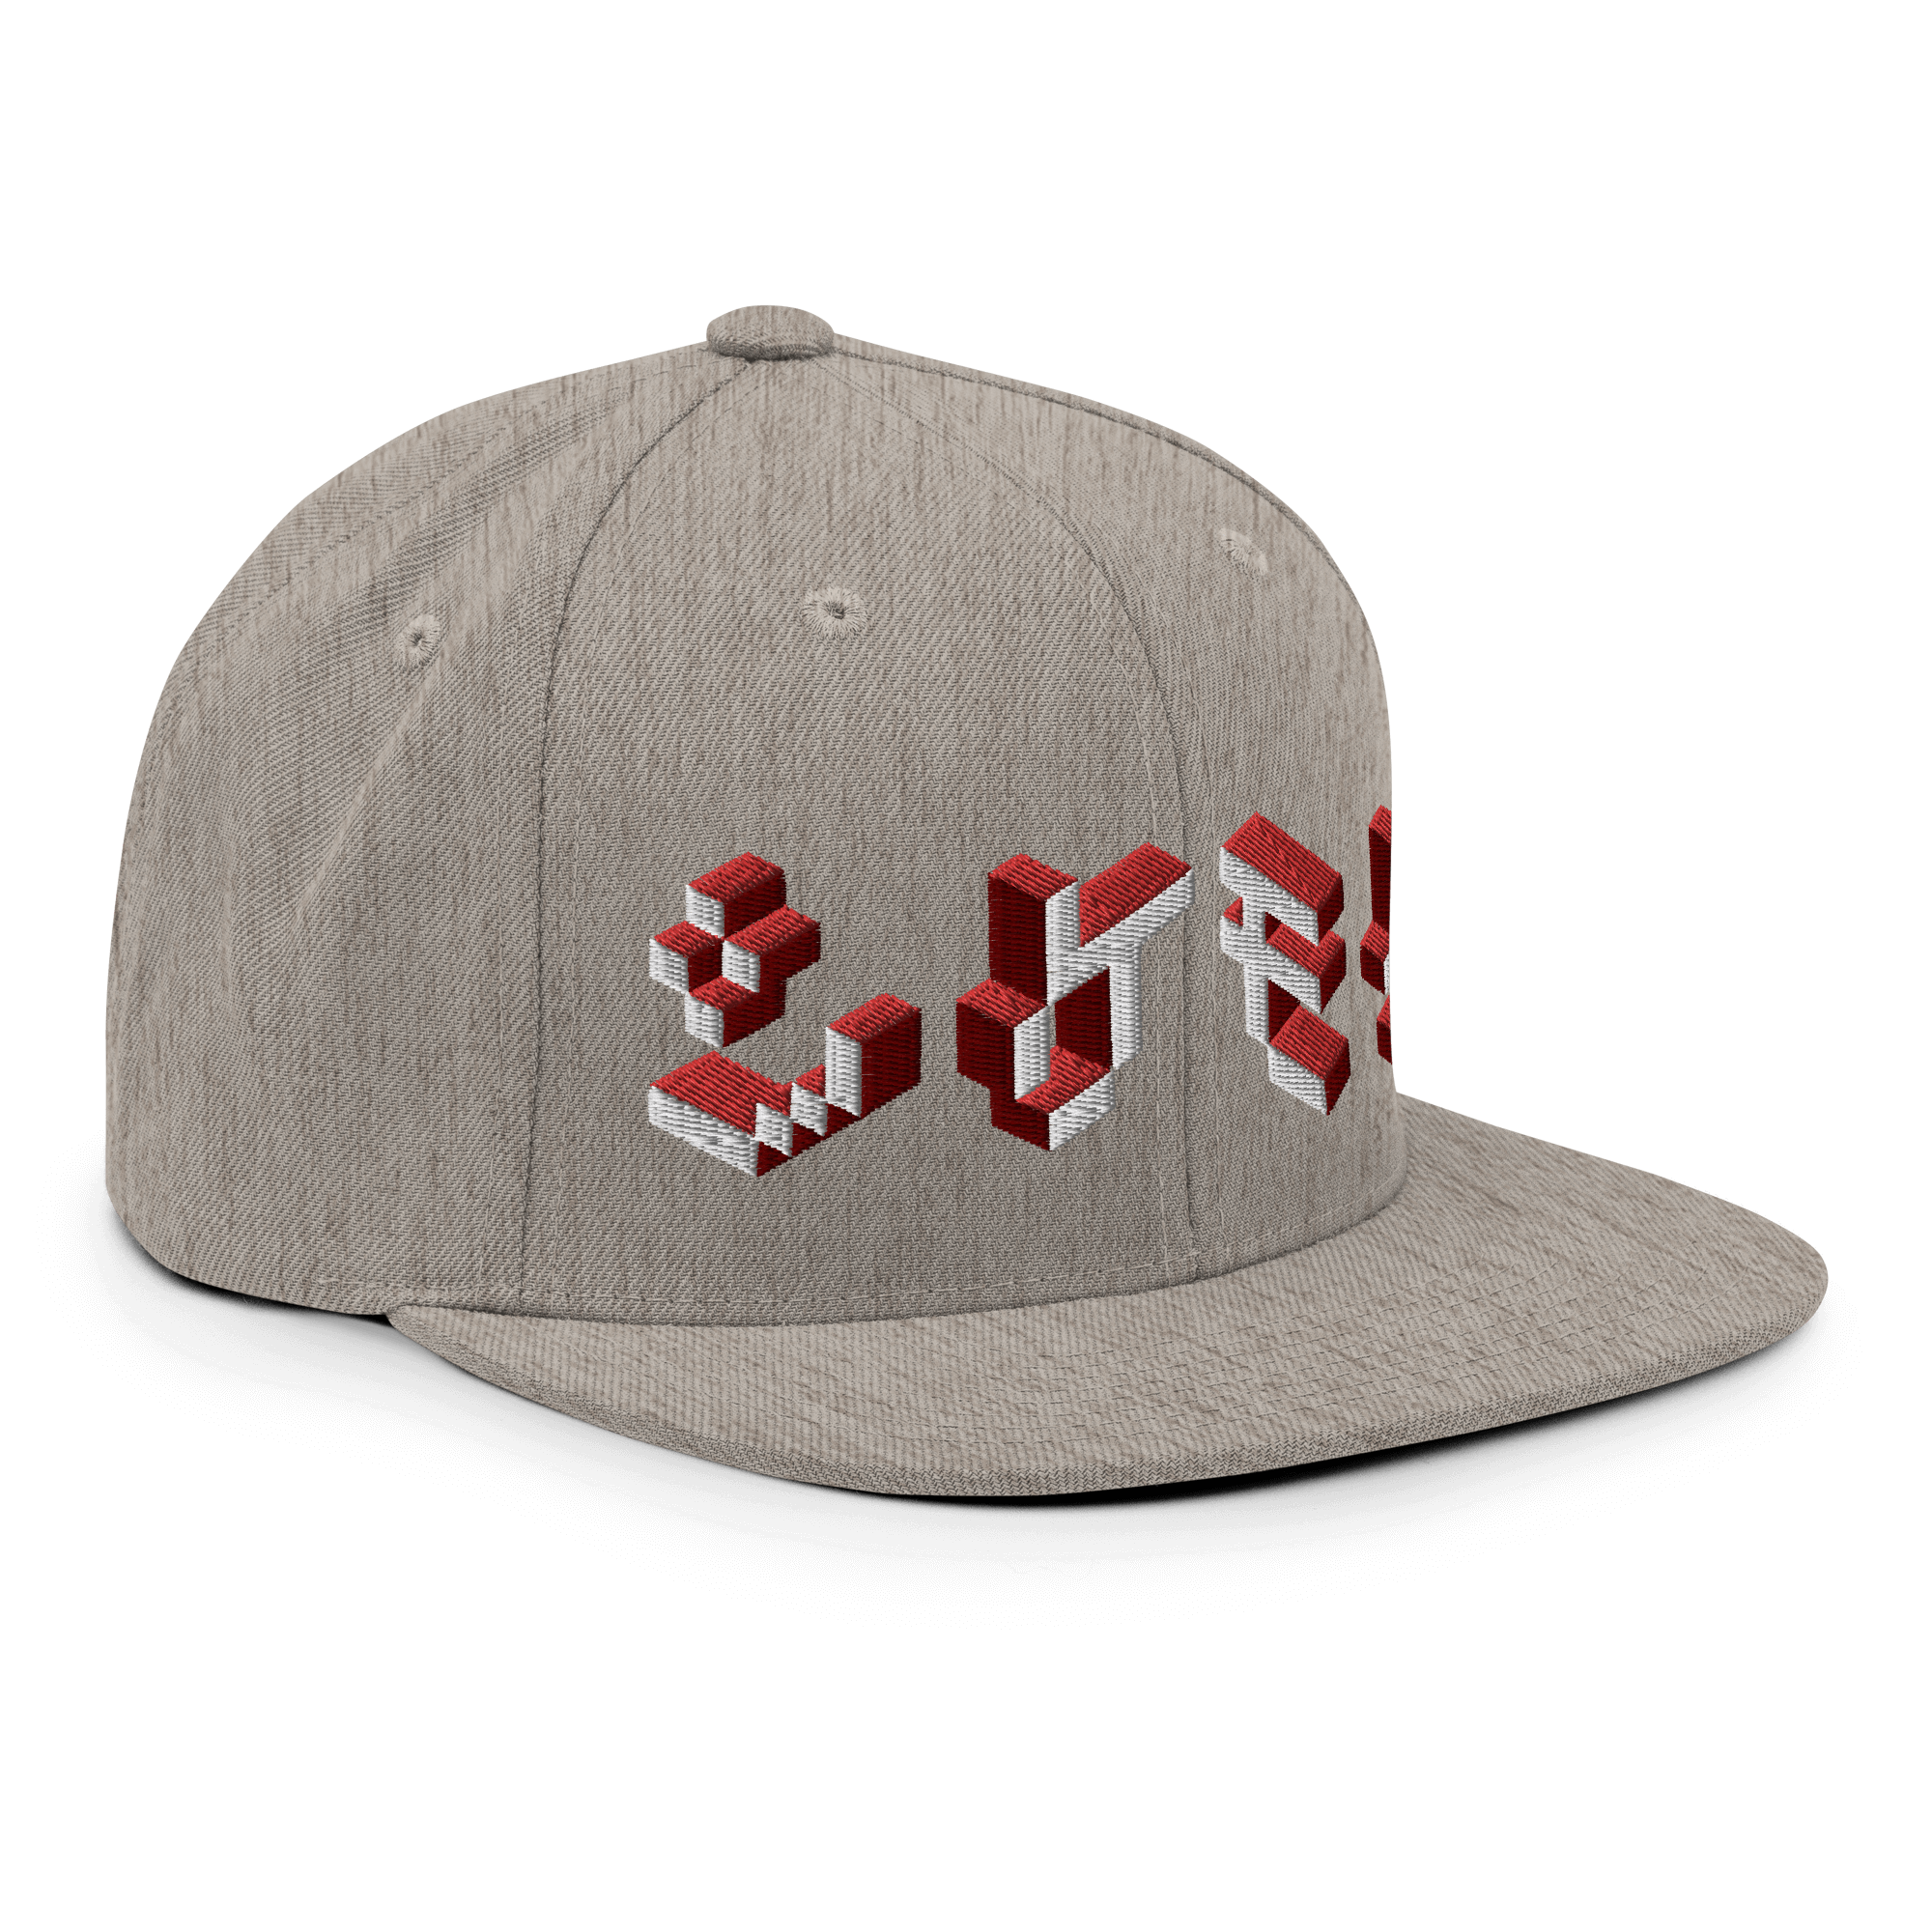 Shikemoku Snapback CapEmbark on a nostalgic journey with our 8-bit 'Shikemoku' design in Katakana Japanese, embodying the spirit of the 'Cigarette Butt.' This hat features a classic fit, flat brim, and full buckram for timeless style. The adjustable snap